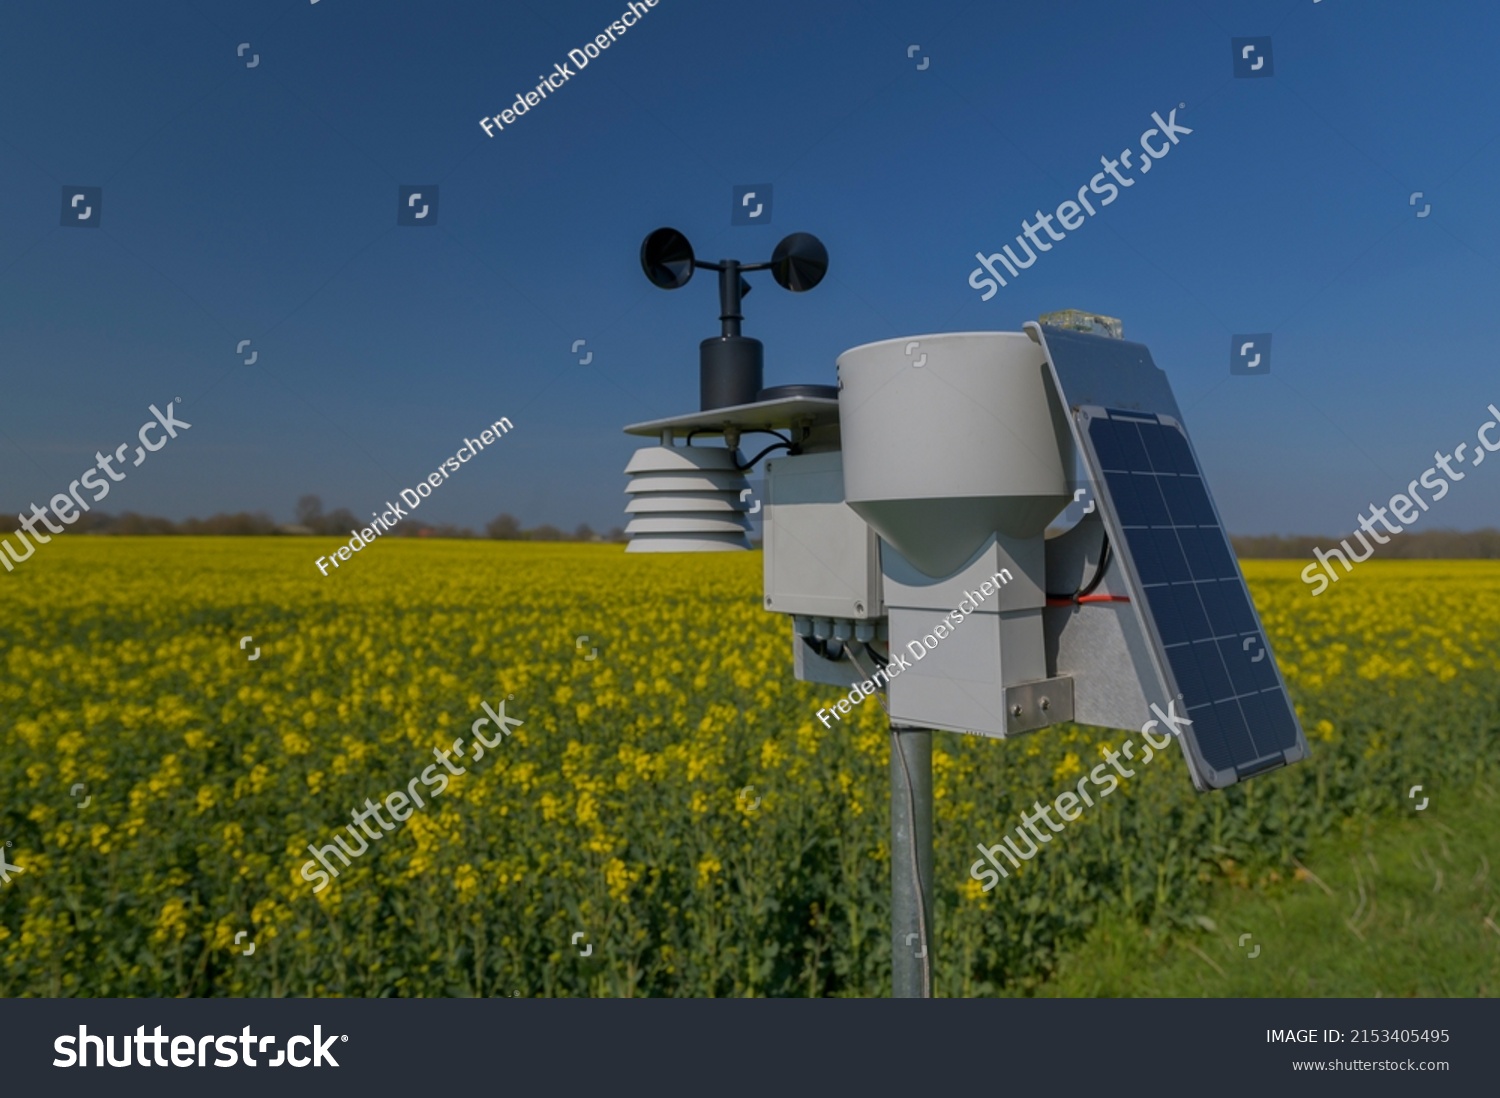 Smart agriculture and smart farm technology. Meteorological instrument used to measure the wind speed and solar cell system in the raps field. Weather station with solar panel placed in the field. #2153405495